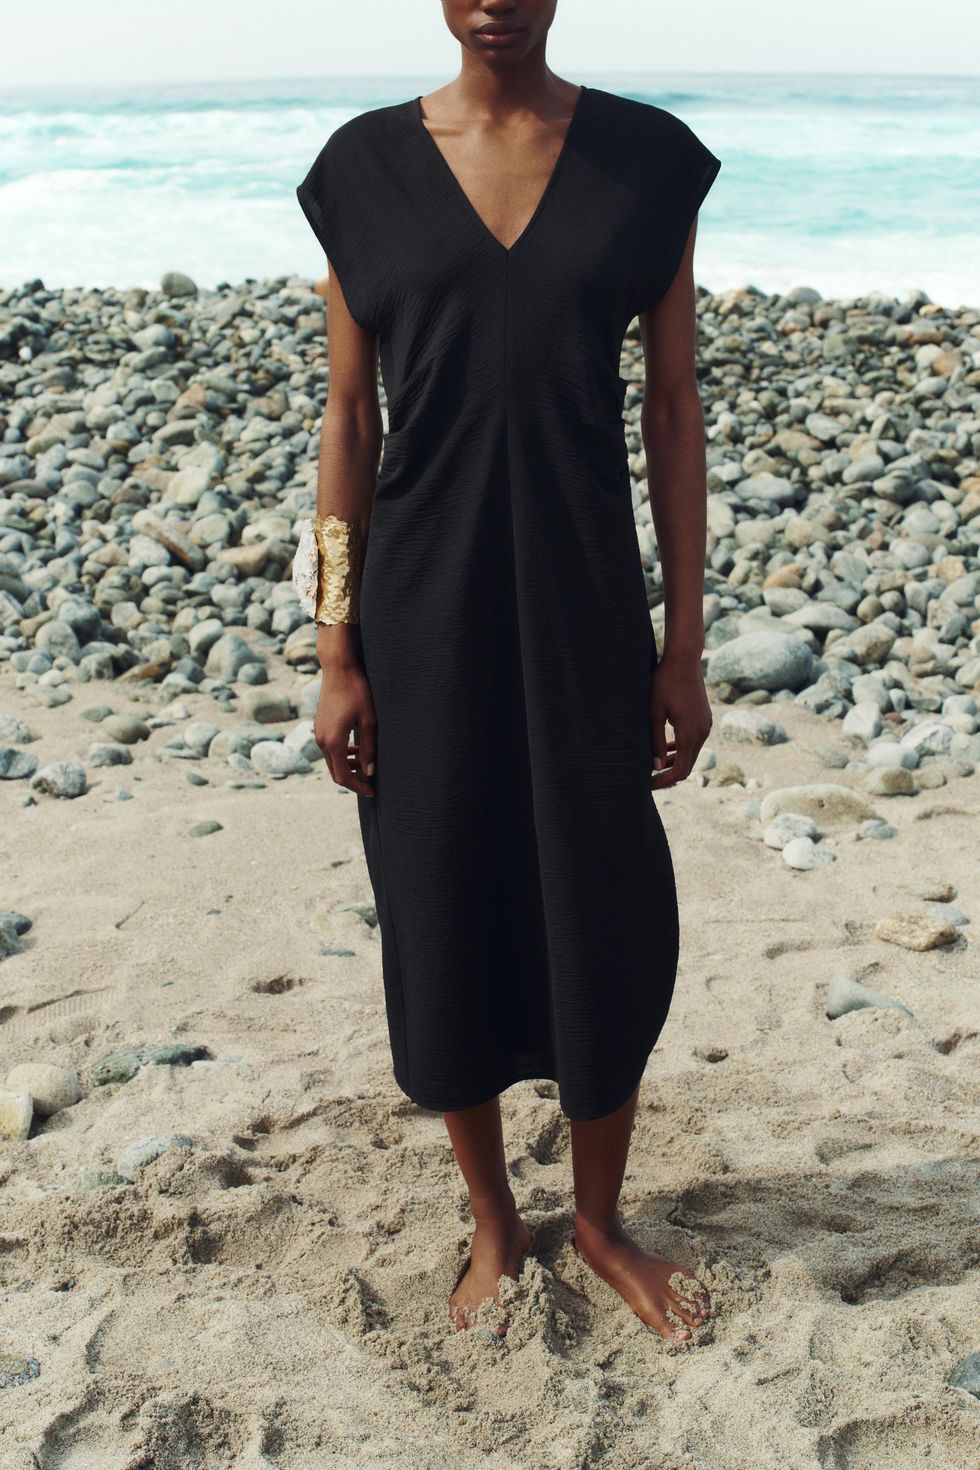 a person in a black dress on a rocky beach